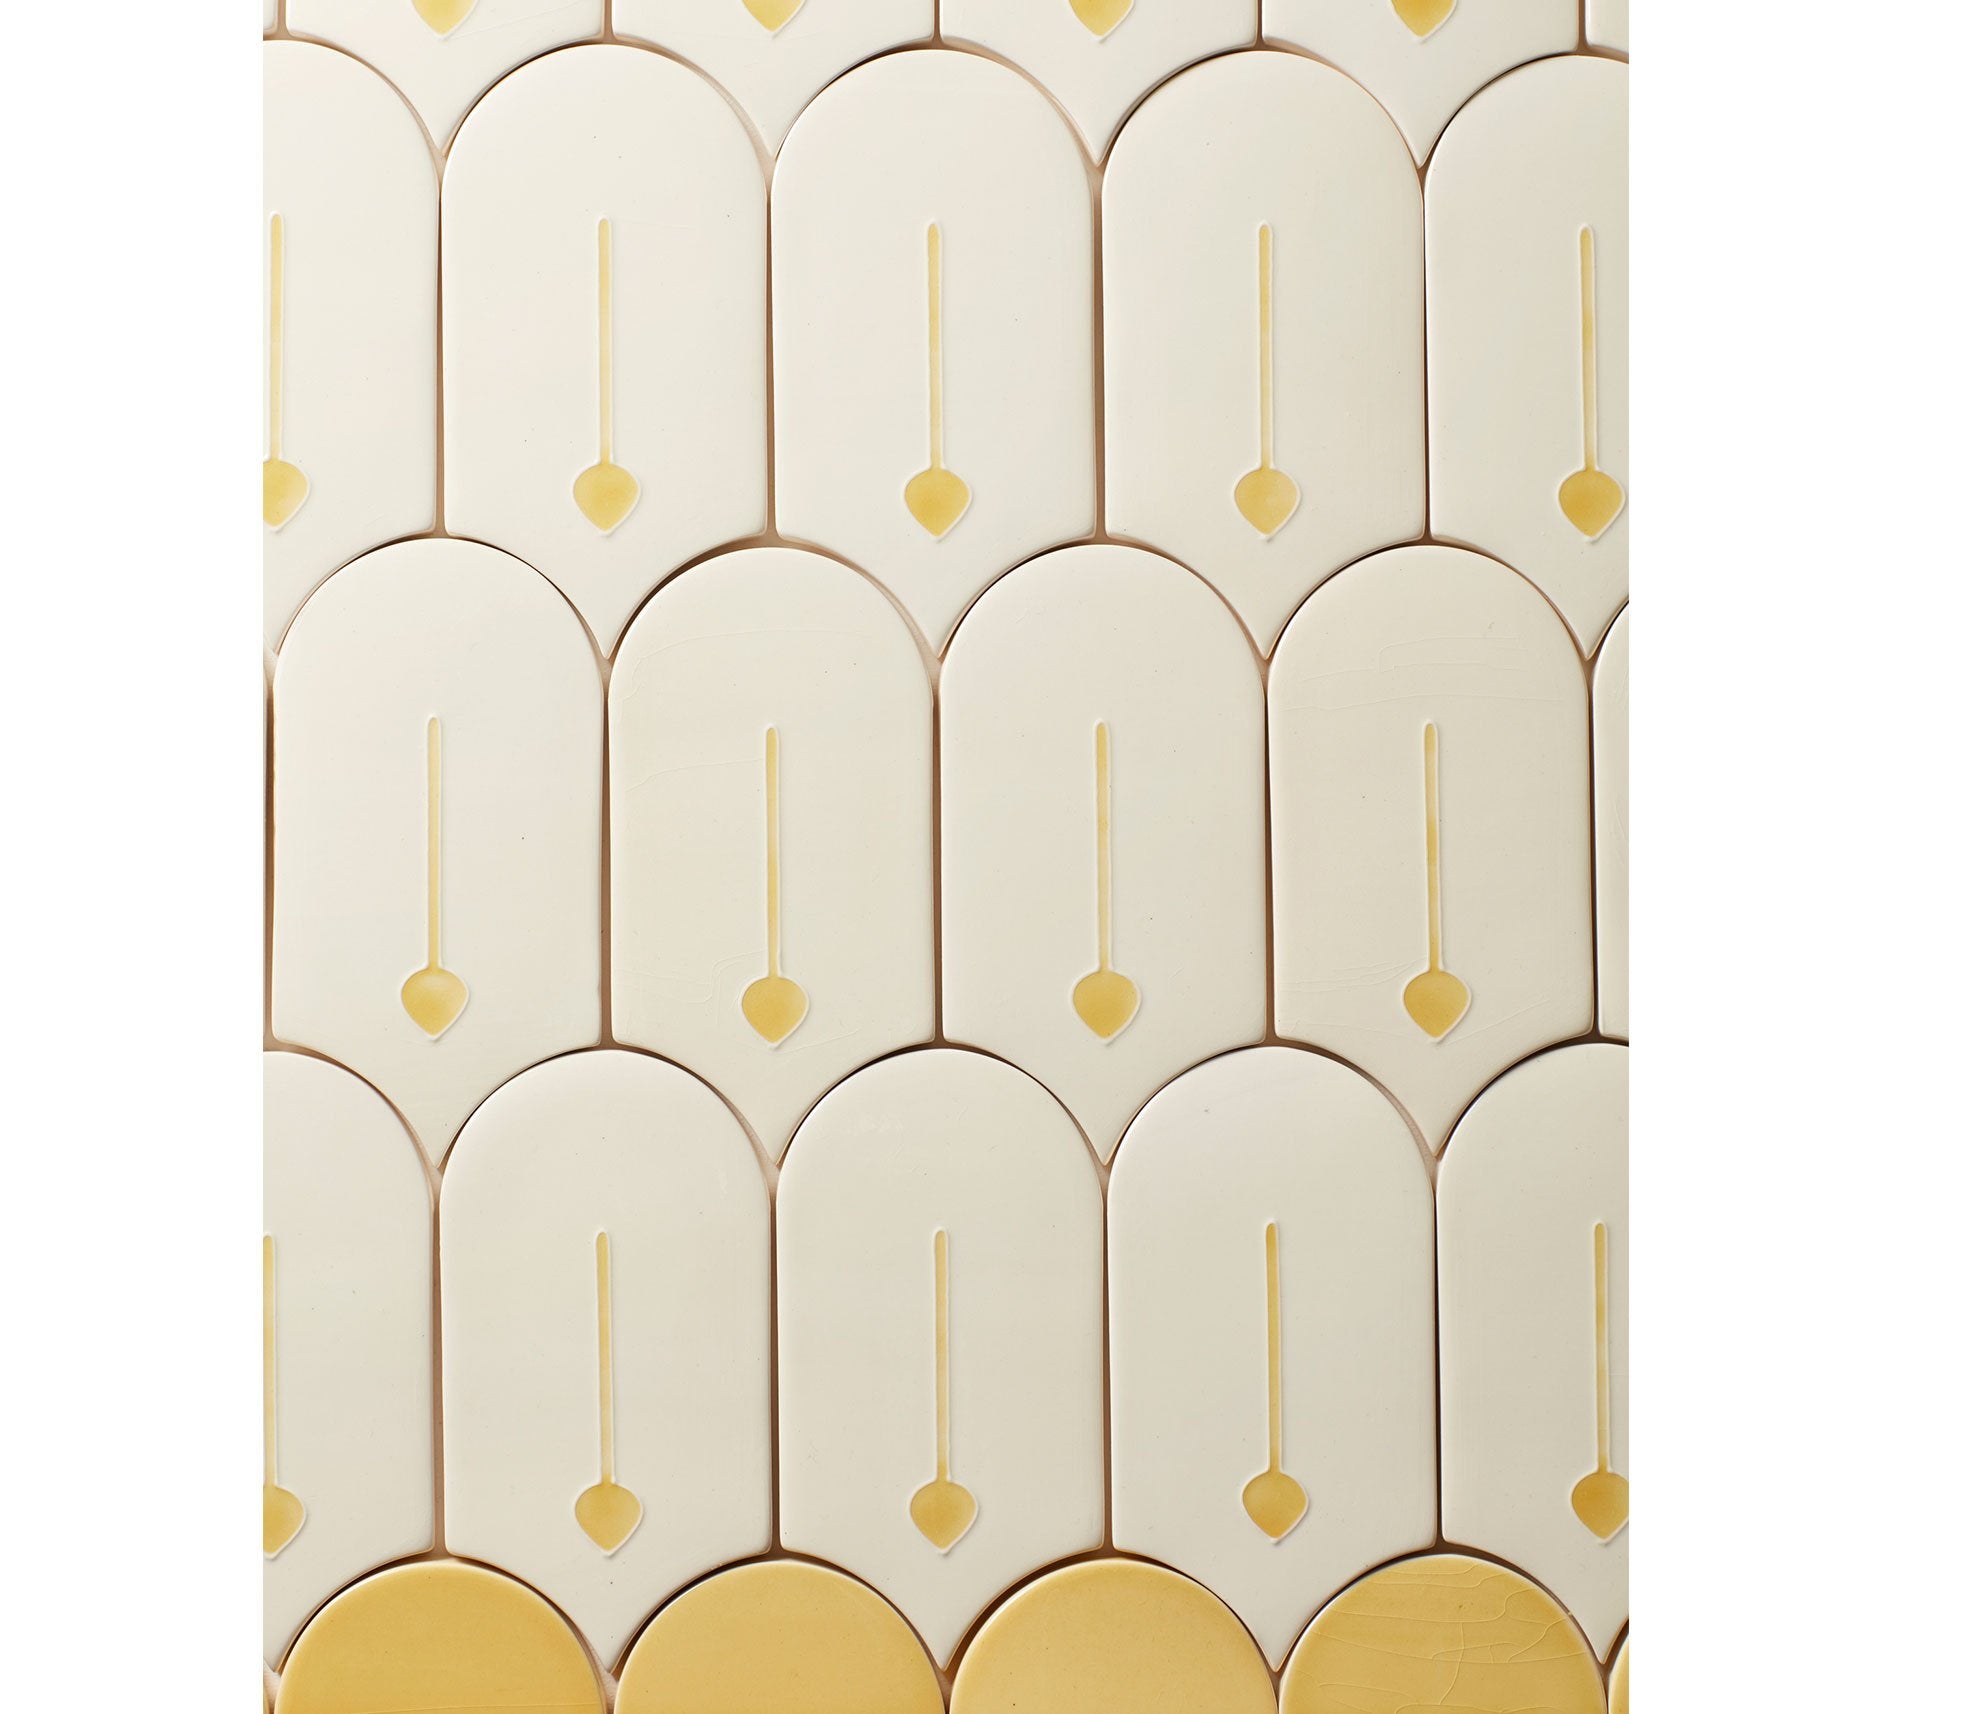 Hanley Tube Lined Decorative Tiles Product Image 10